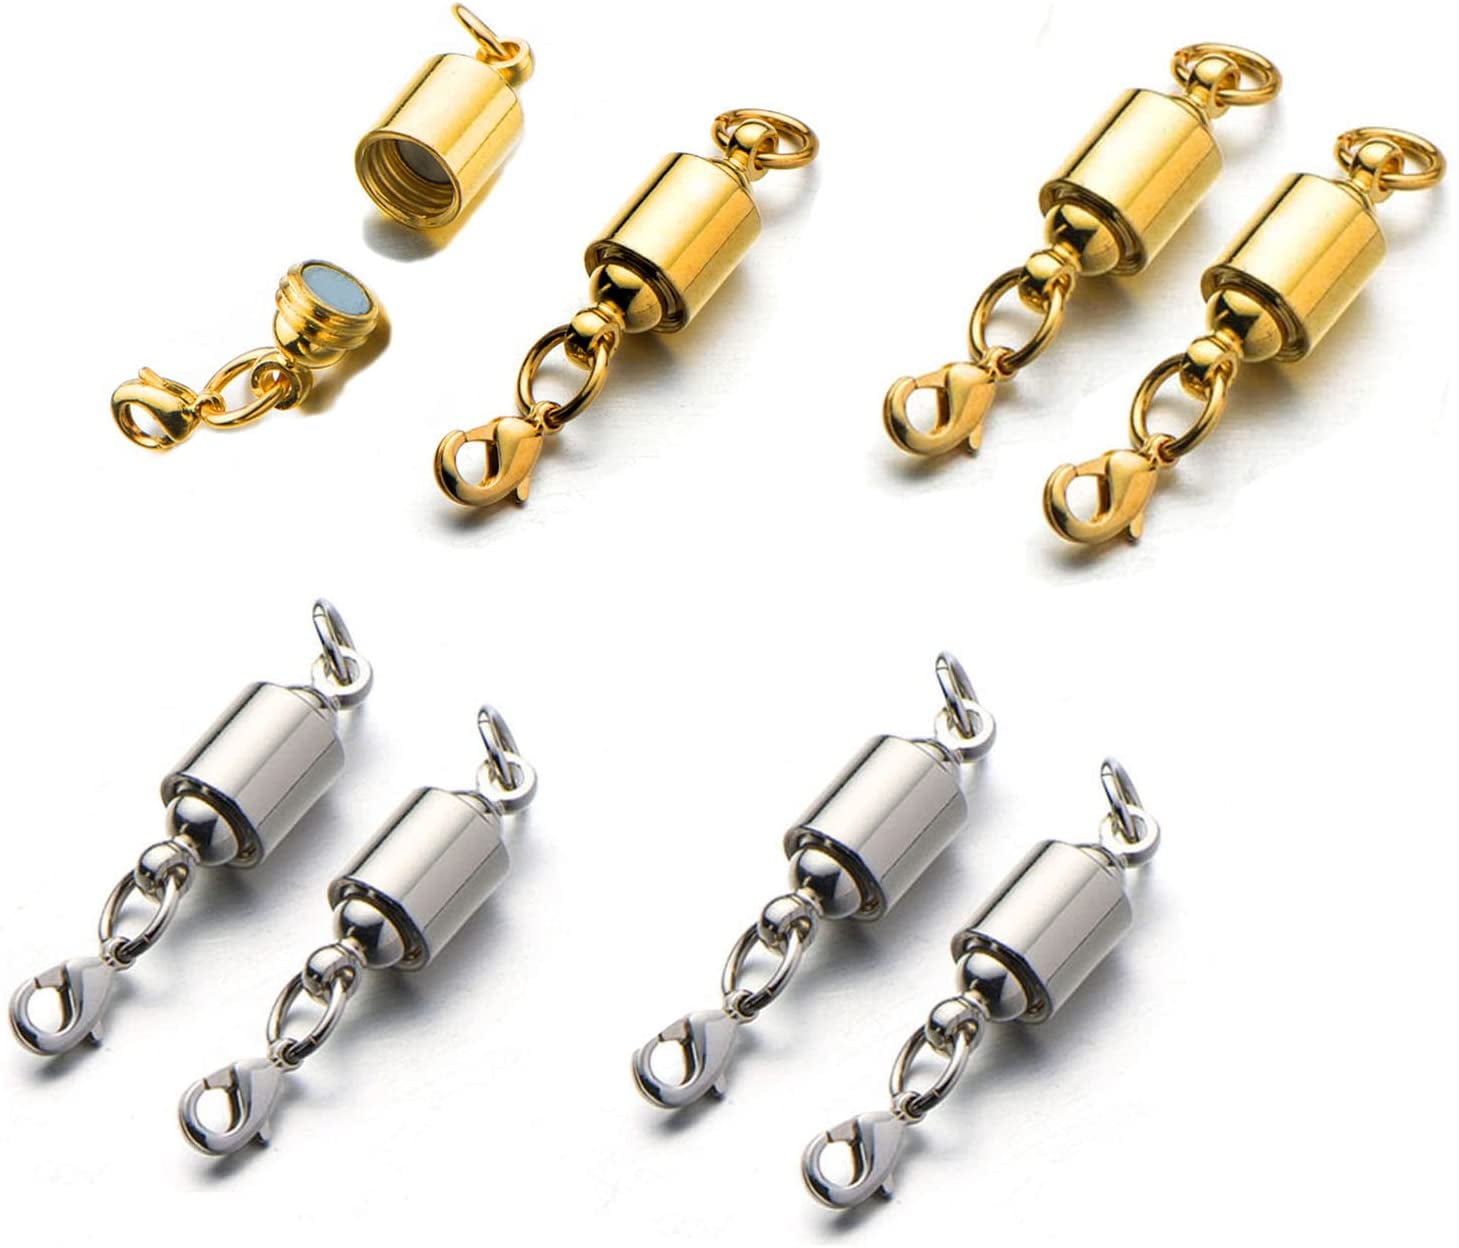 5 Sets Silver/Gold Plated Round Strong Magnetic Hook Clasps Jewelry Finding DIY 